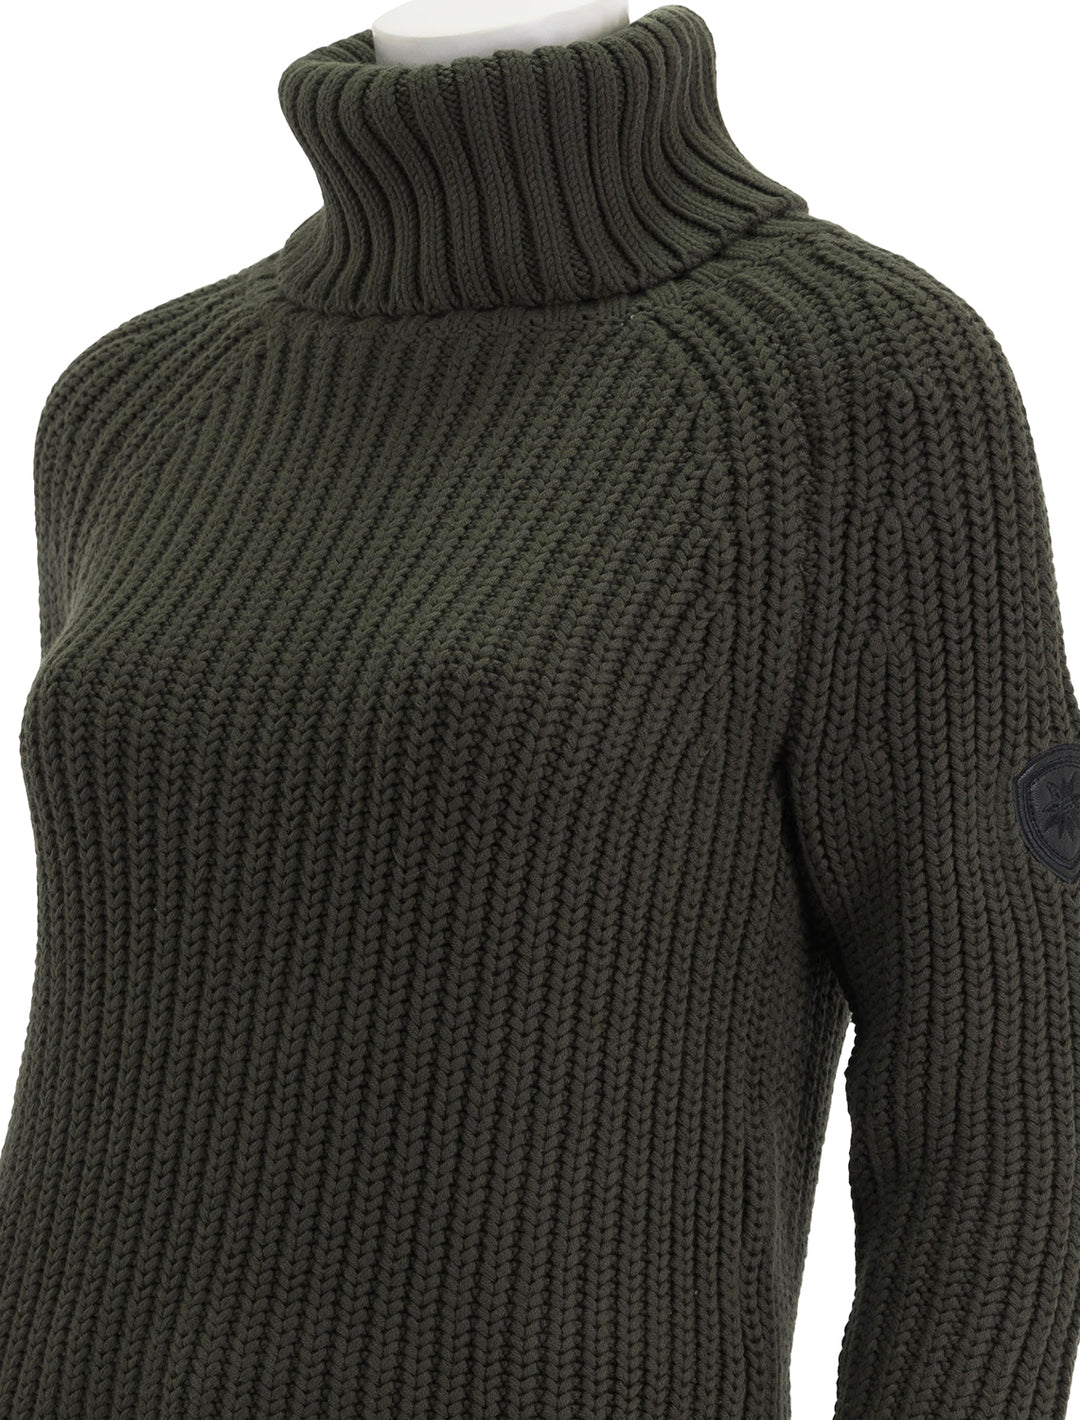 Close-up view of Alp N Rock's simone sweater in olive.